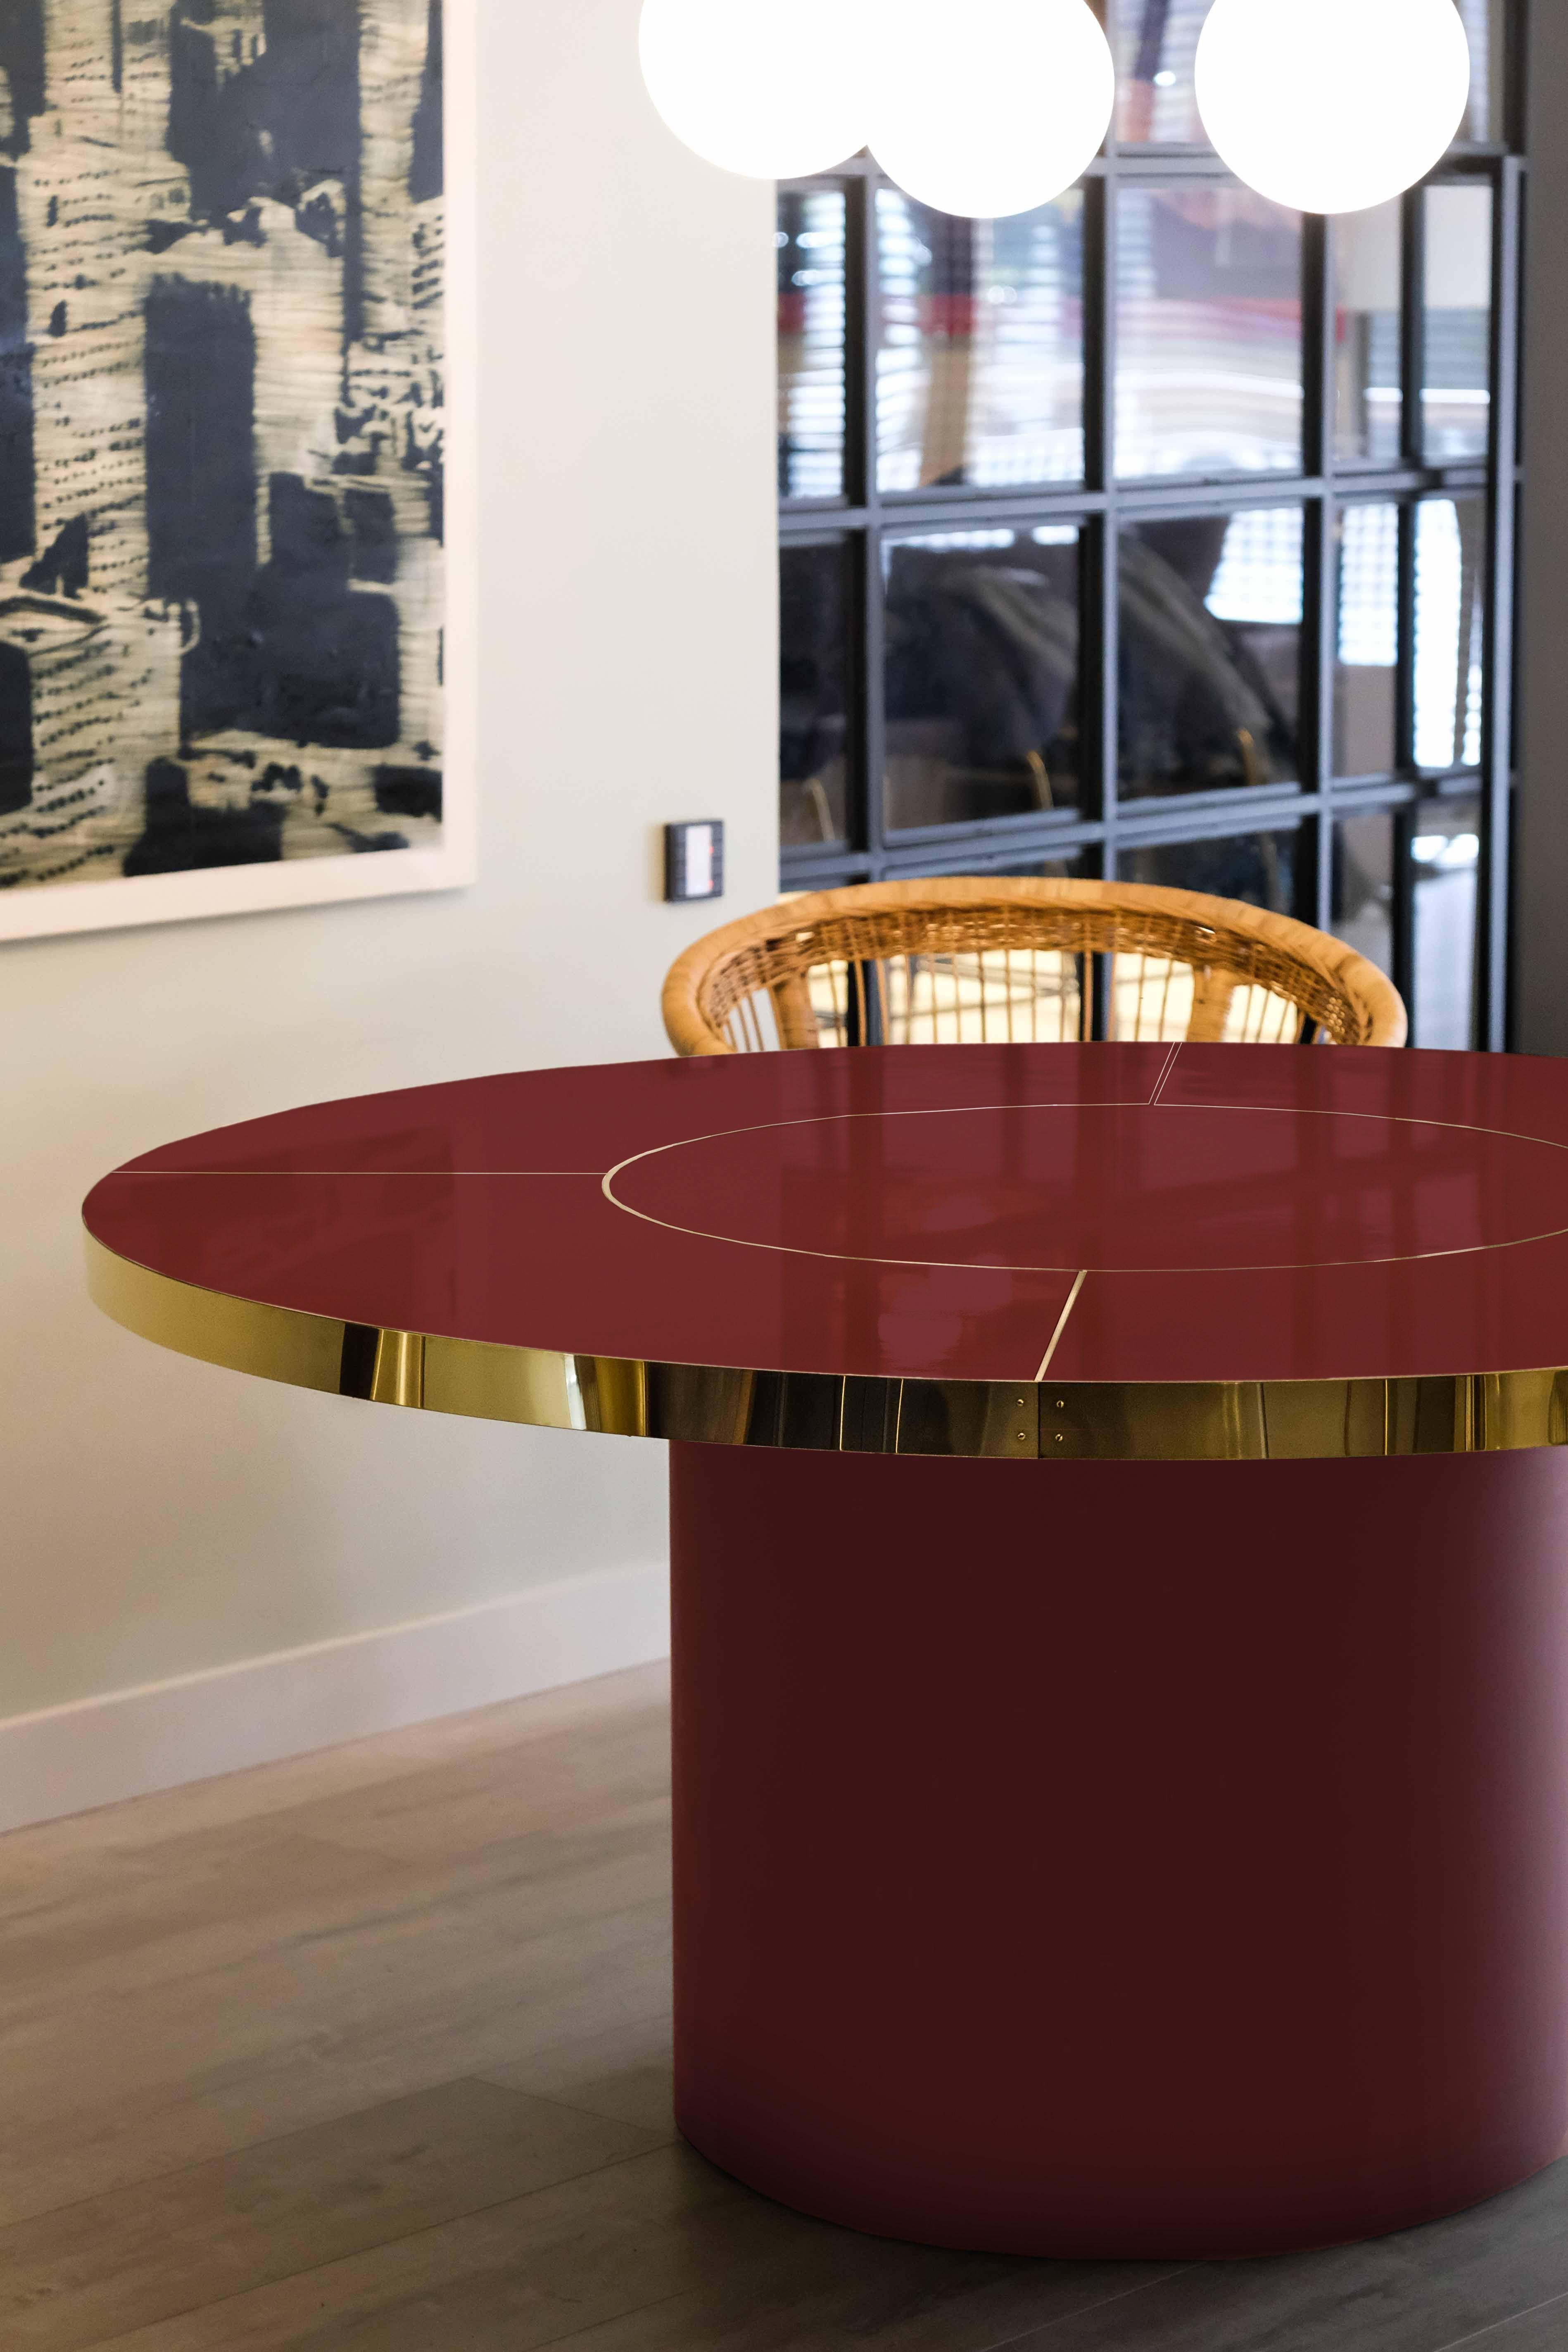 Retro Design Round Dining Table Palm Springs Style High Gloss Laminated & Brass Details Medium Size

Discover our incredible collection of retro-style design tables inspired by the iconic decoration of the 1950s, 60s, and 70s of Palm Springs in